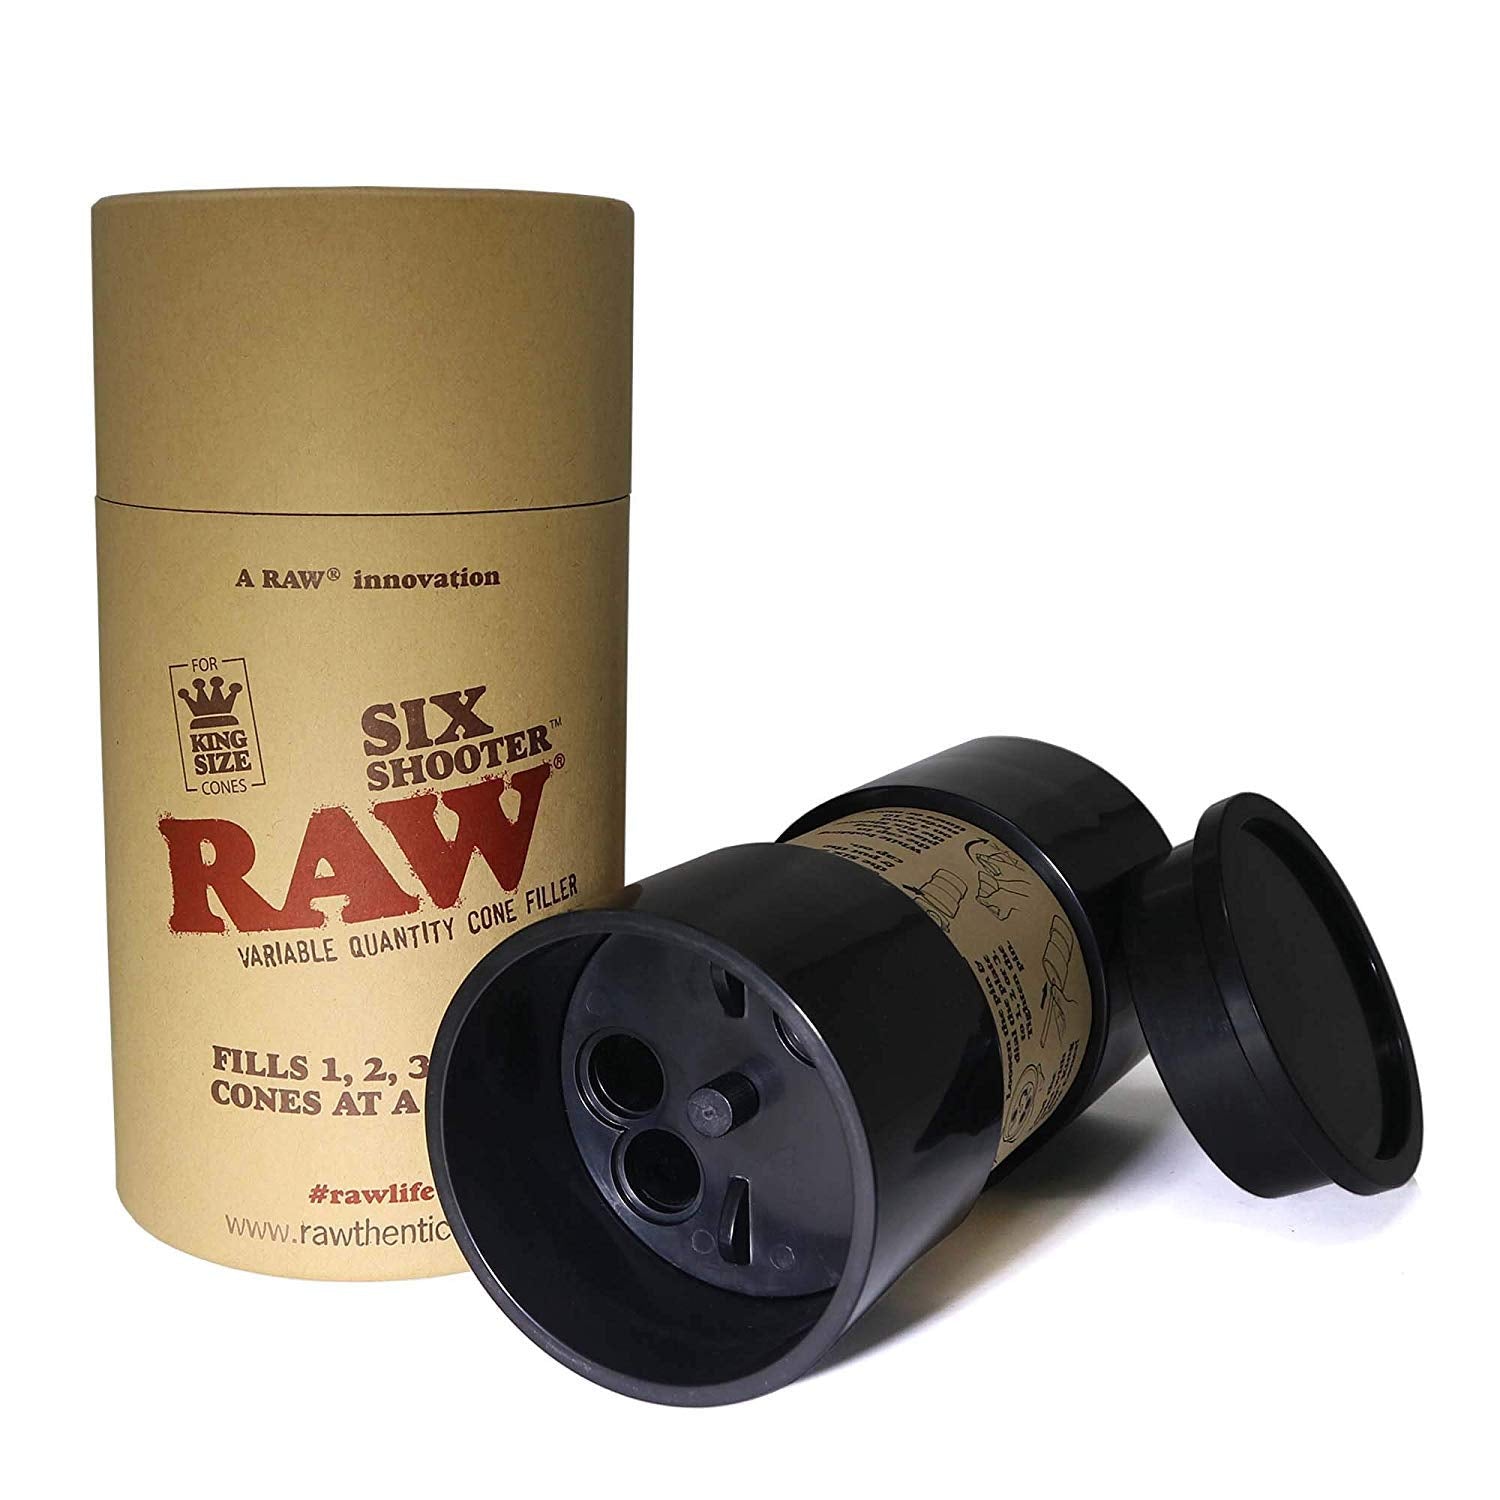 RAW Six Shooter | King Size Variable Quantity Cone Filler Device | Fills 1,2,3, or 6 Cones at a Time!